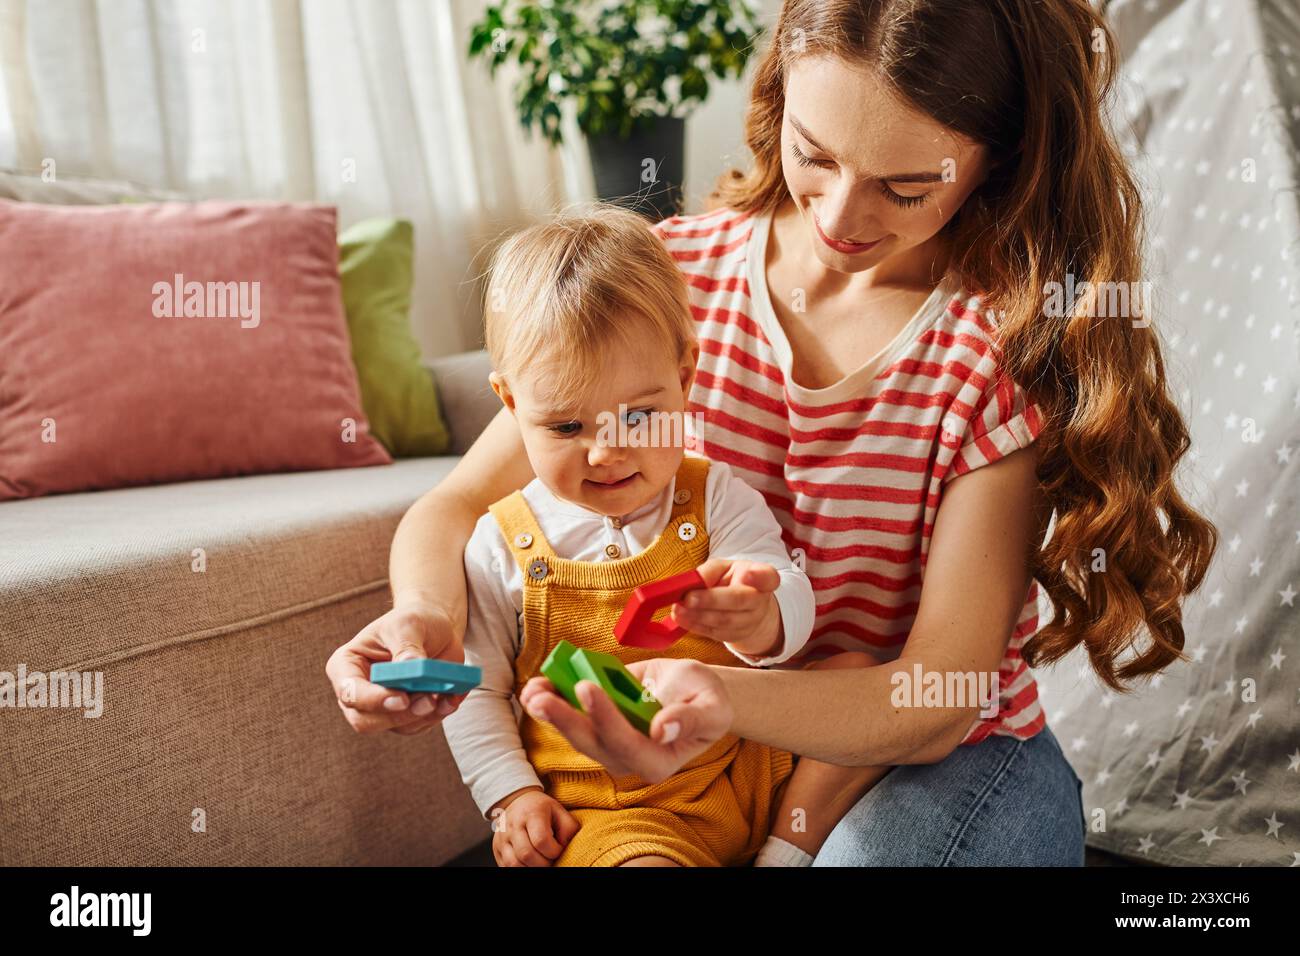 A young mother happily interacts with her toddler daughter, engaging in playful activities on the floor at home. Stock Photo